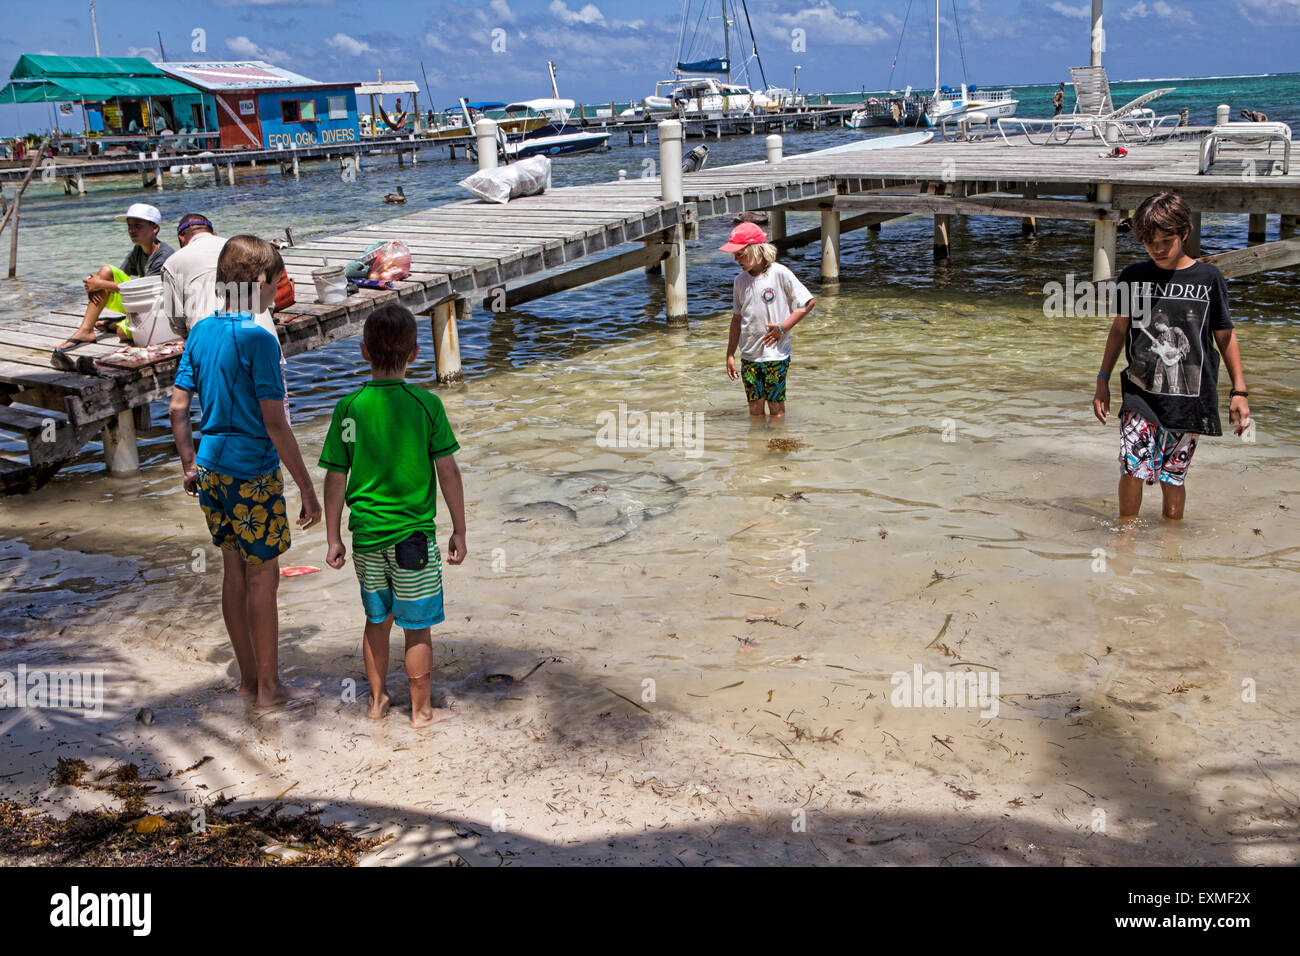 Locals cleaning fish at the docks, feeding the Blue Rays while children watch in San Pedro, Ambergris Caye, Belize. Stock Photo